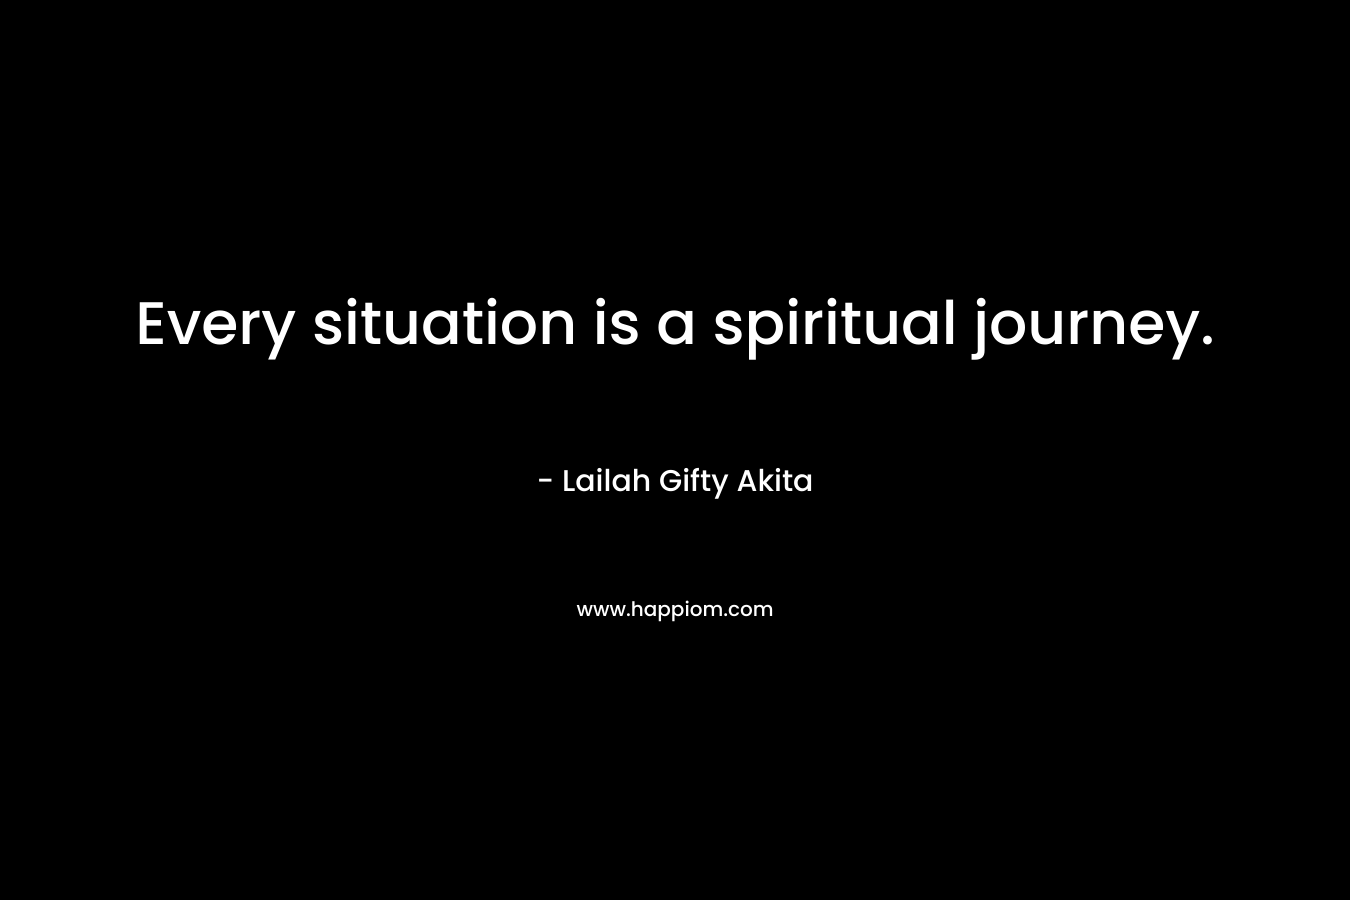 Every situation is a spiritual journey.